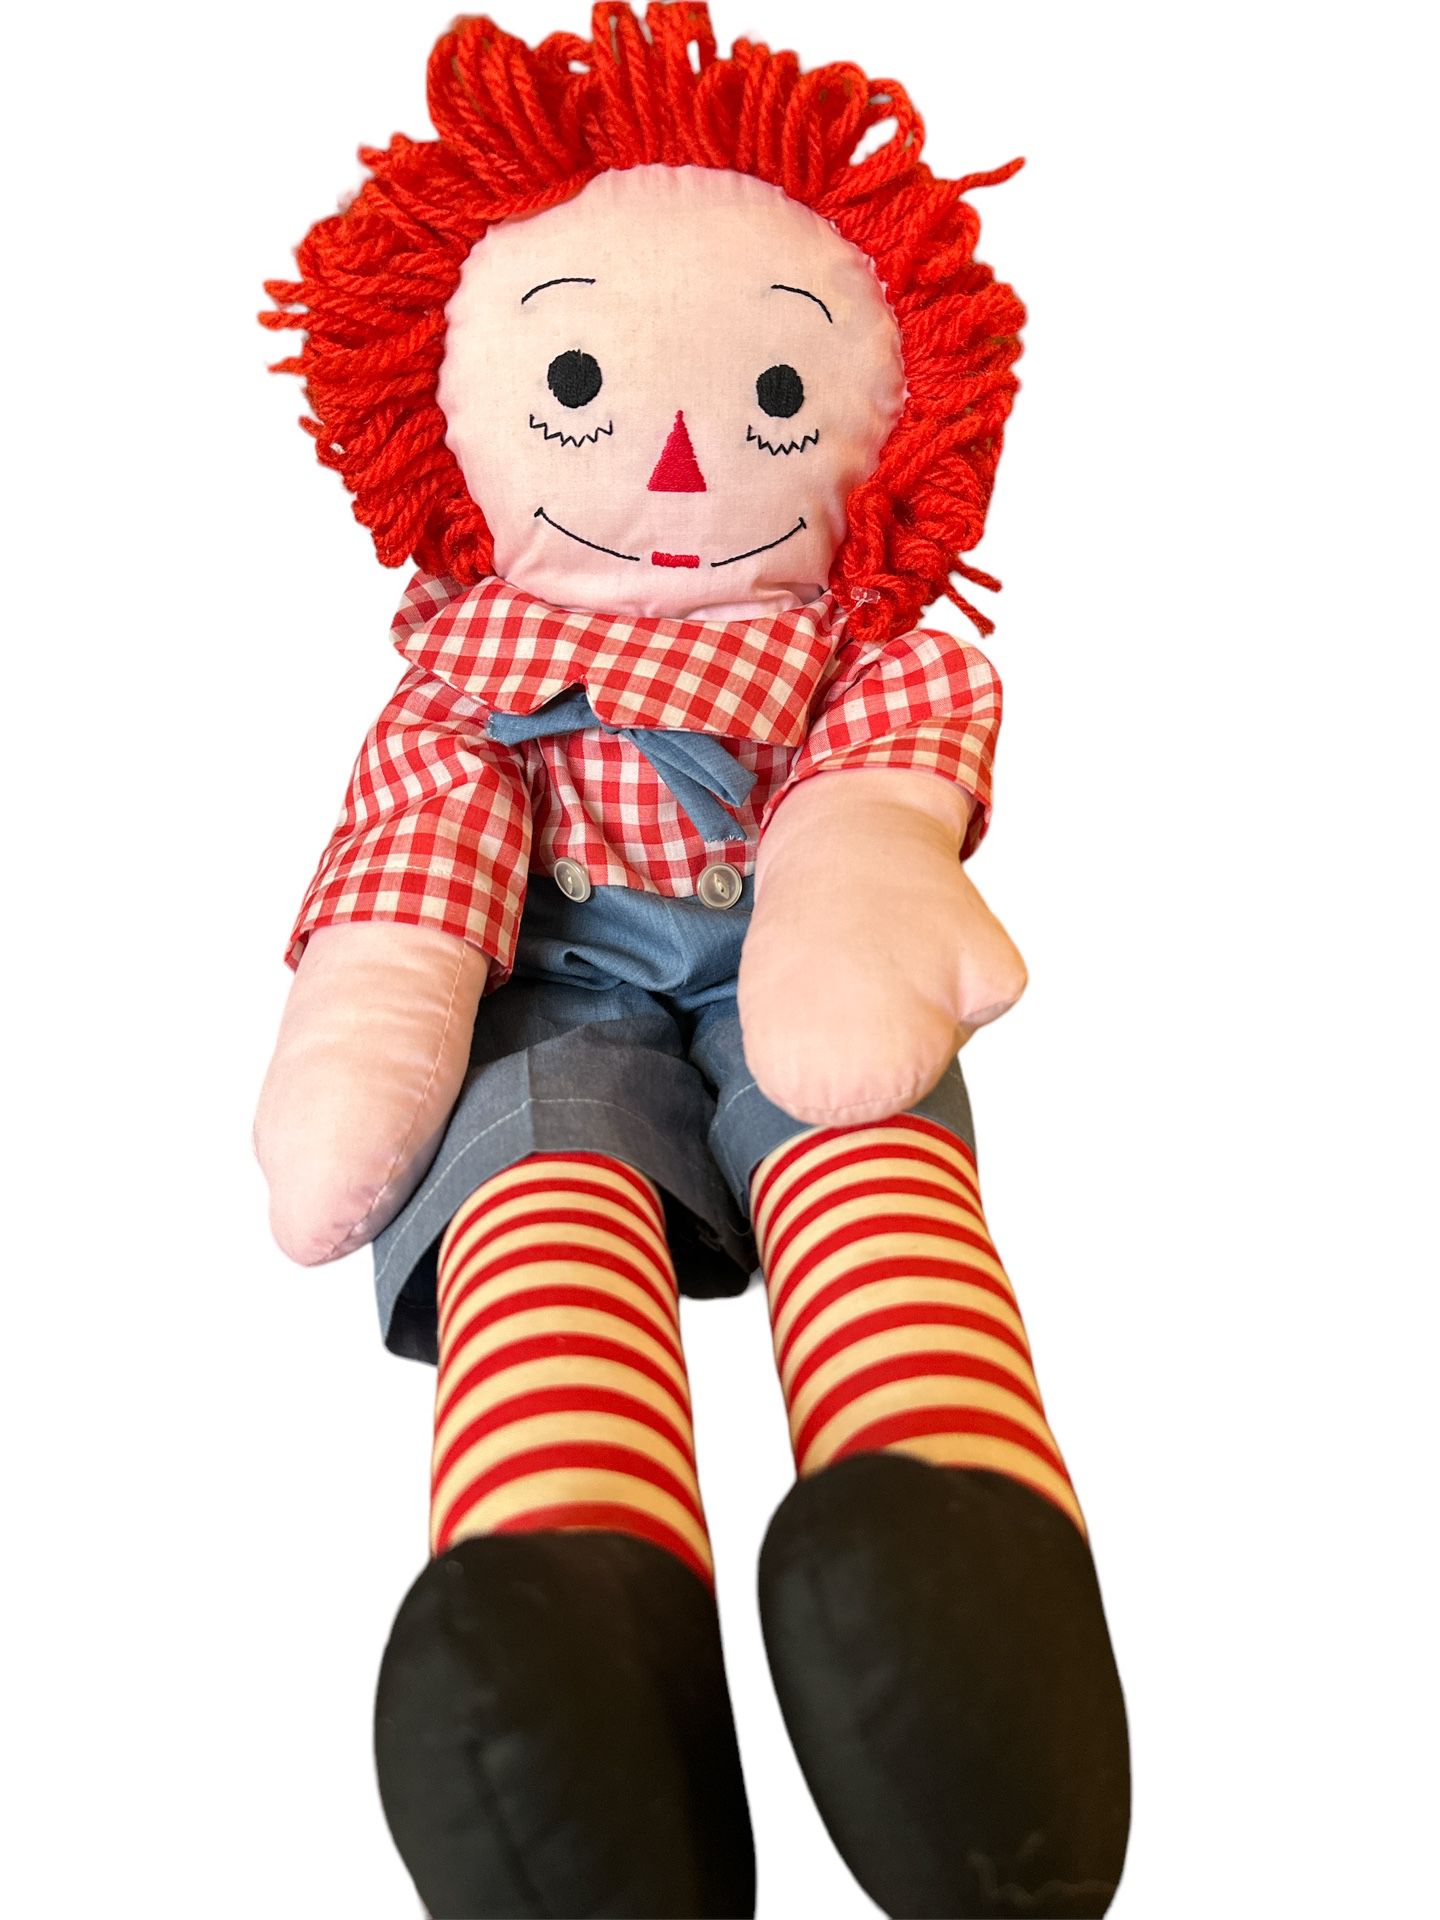 Vintage Raggedy Andy Doll, Knickerbocker Raggedy Andy Cloth Doll Soft Doll Gift, Rustic Dolls In Dress, Collectible Dolls For Doll Lover